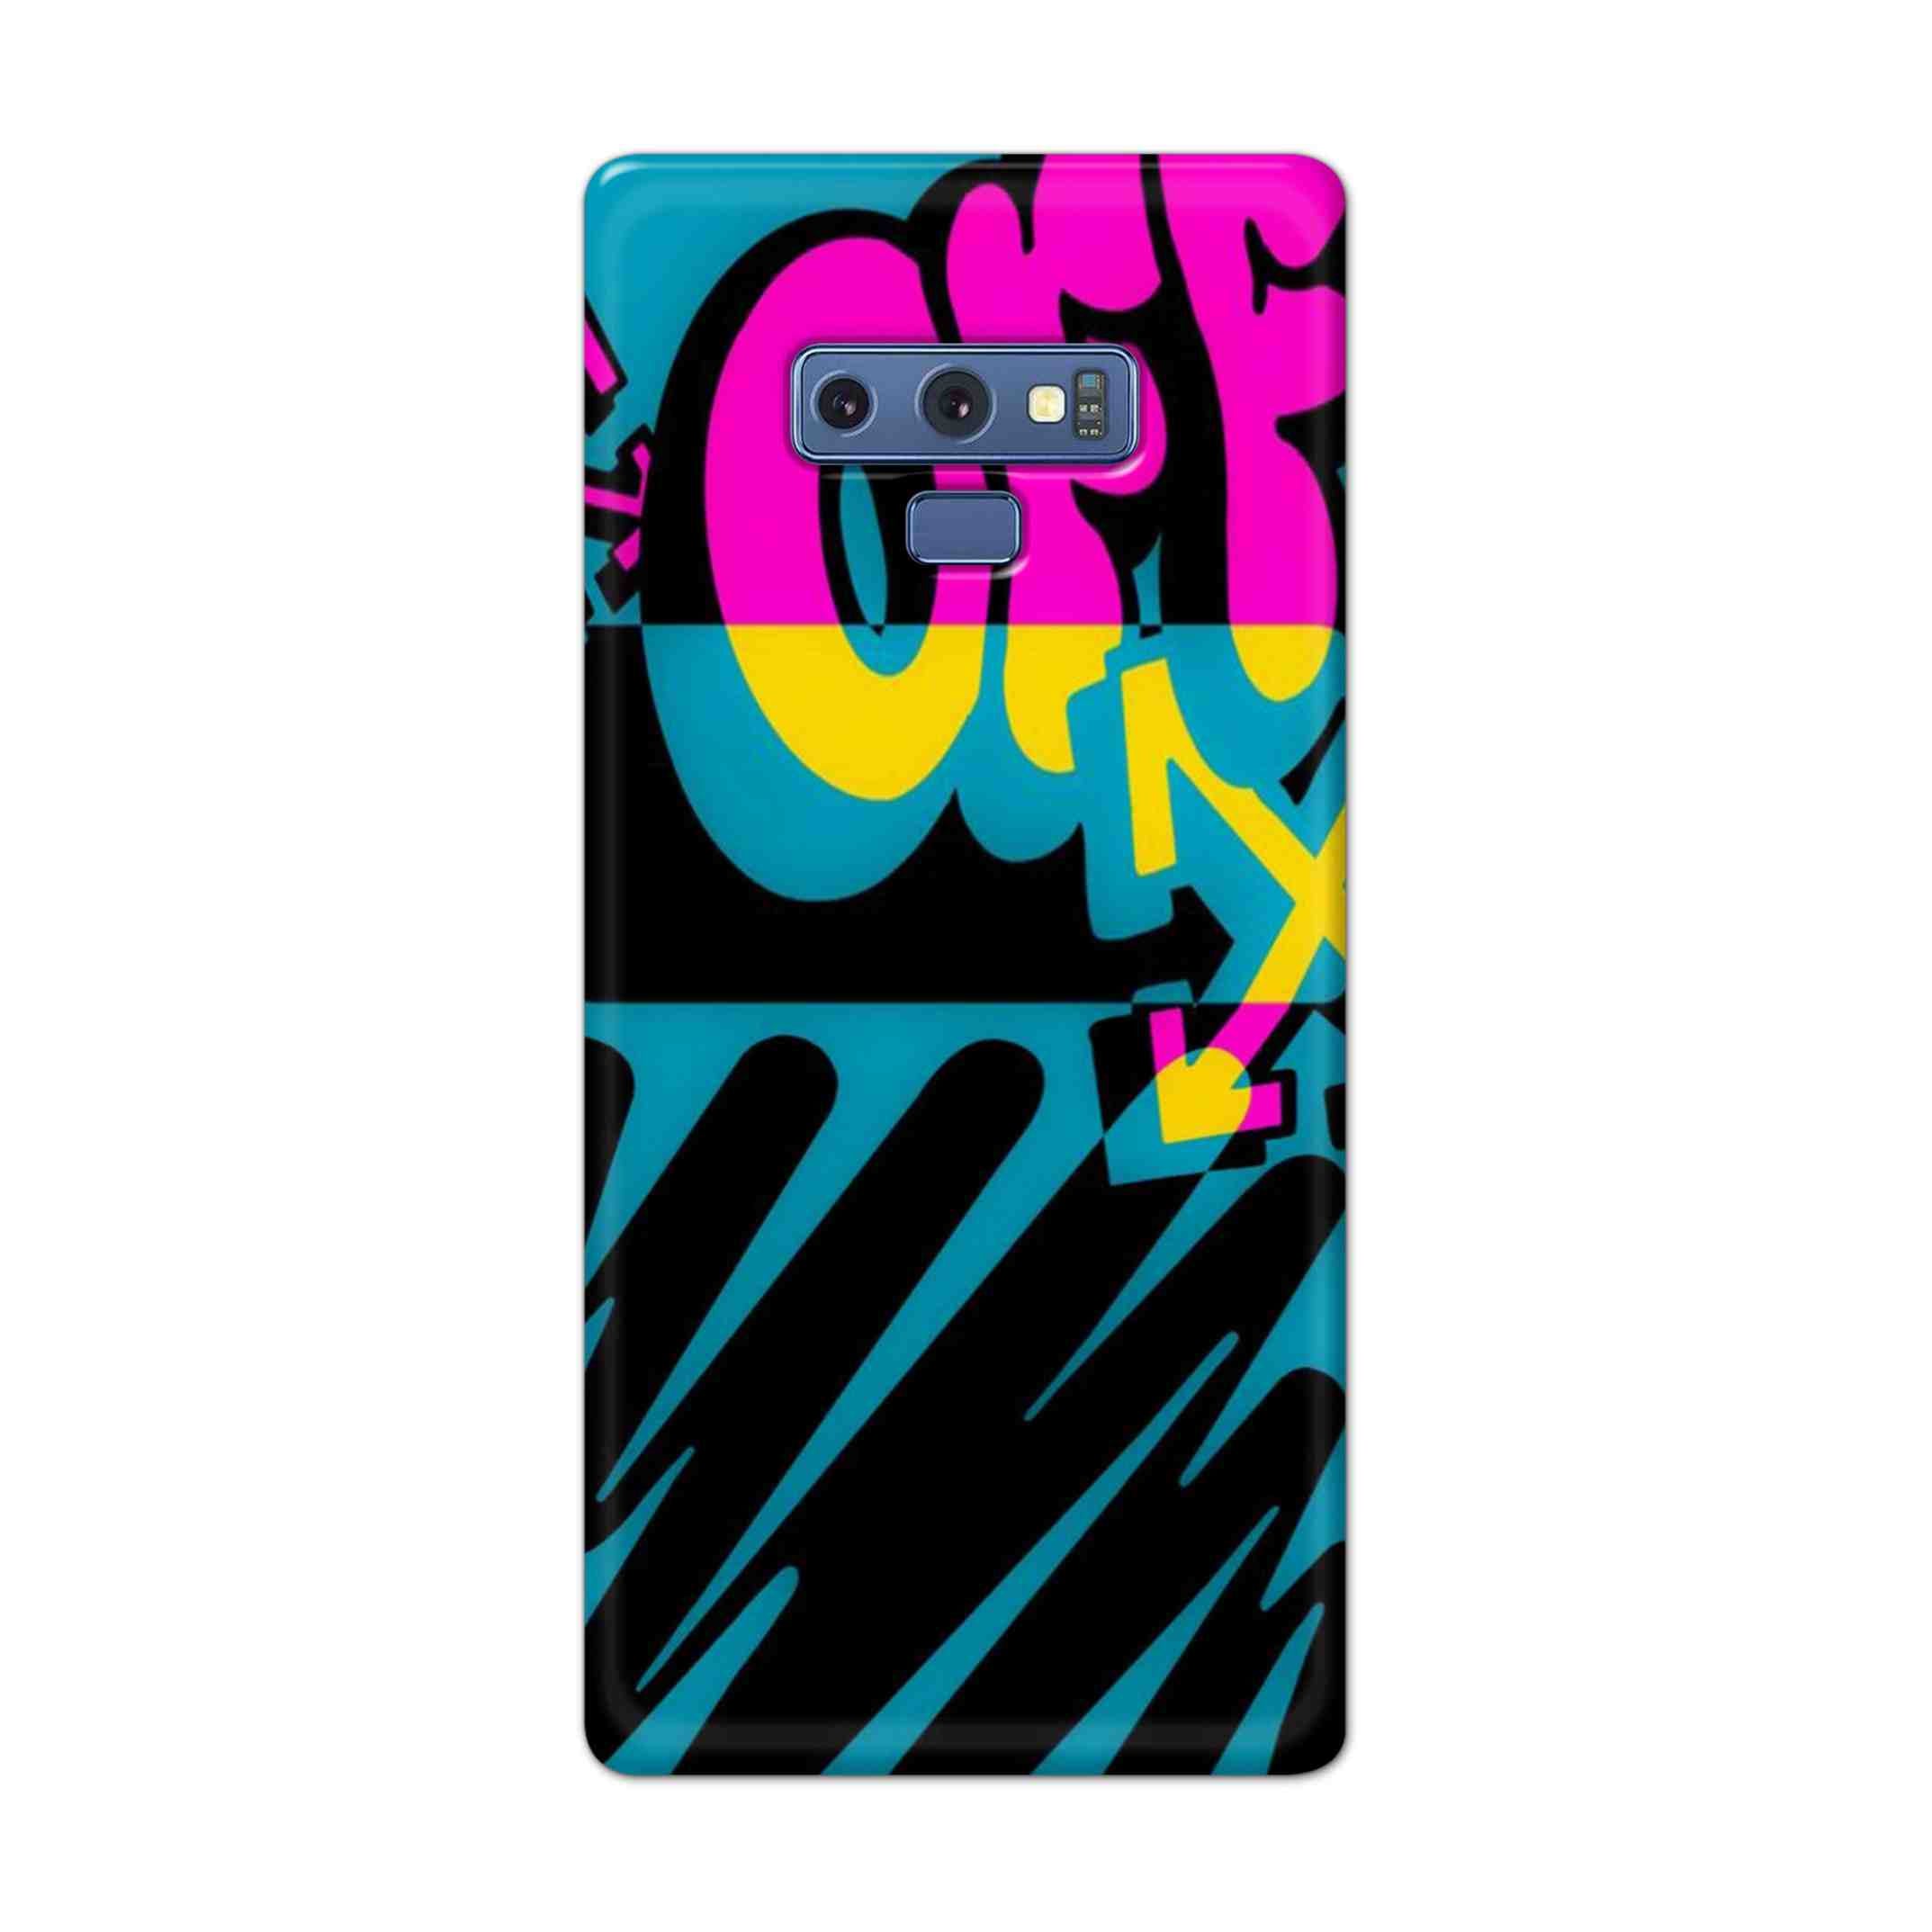 Buy Off Hard Back Mobile Phone Case Cover For Samsung Galaxy Note 9 Online